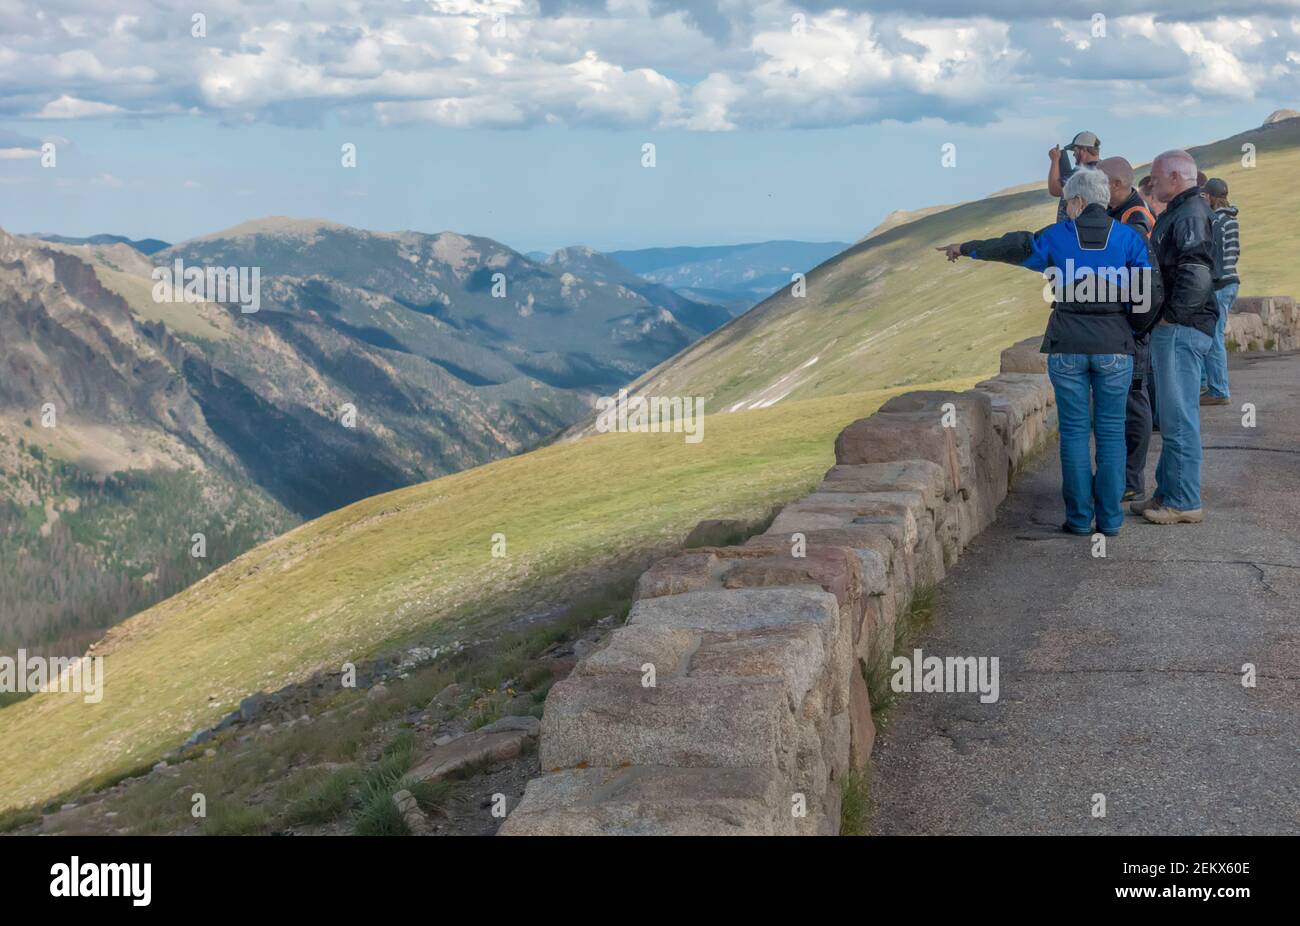 People at viewpoint Rocky Mountain National Park, Colorado, USA Stock Photo